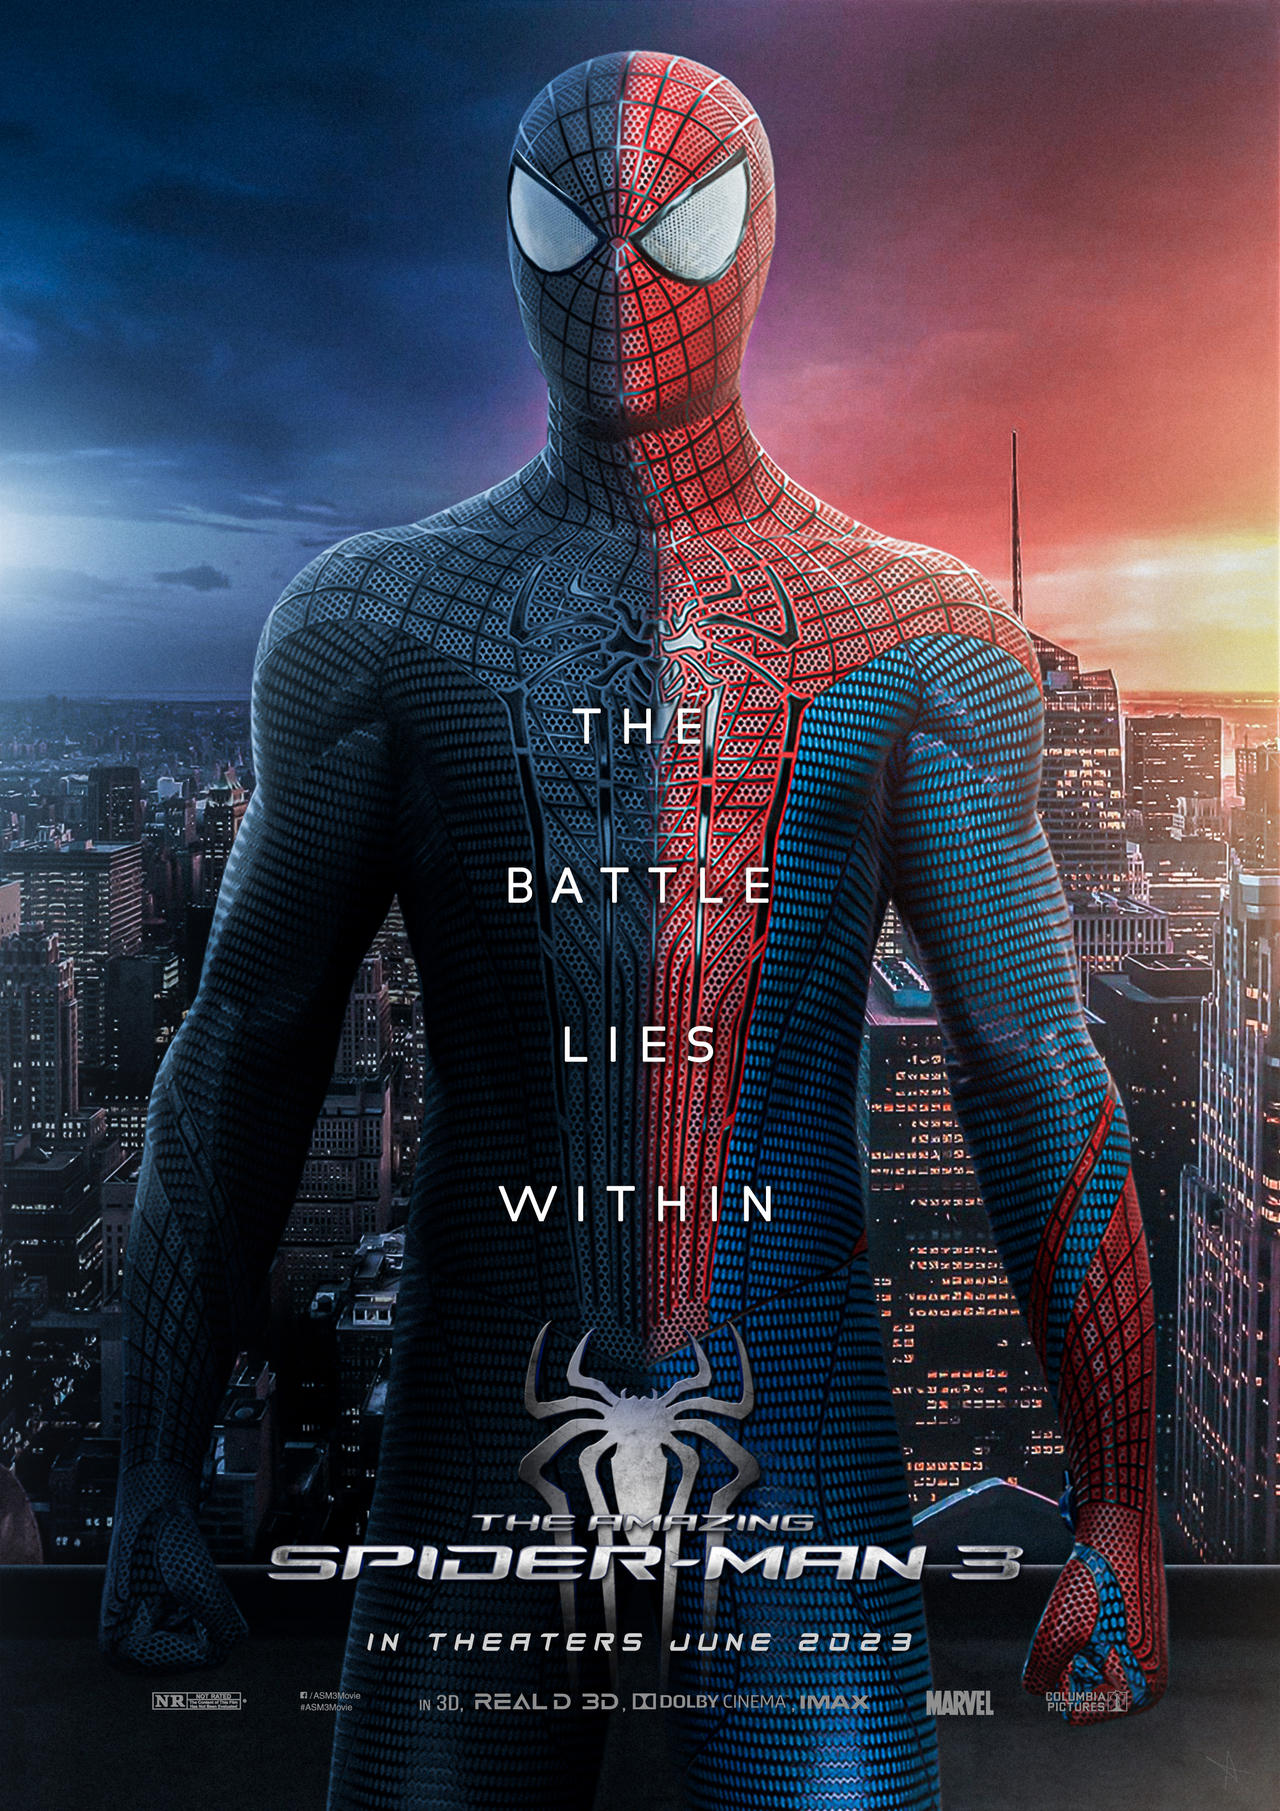 The Amazing Spider-Man 3 - Poster Concept by Byzial on DeviantArt